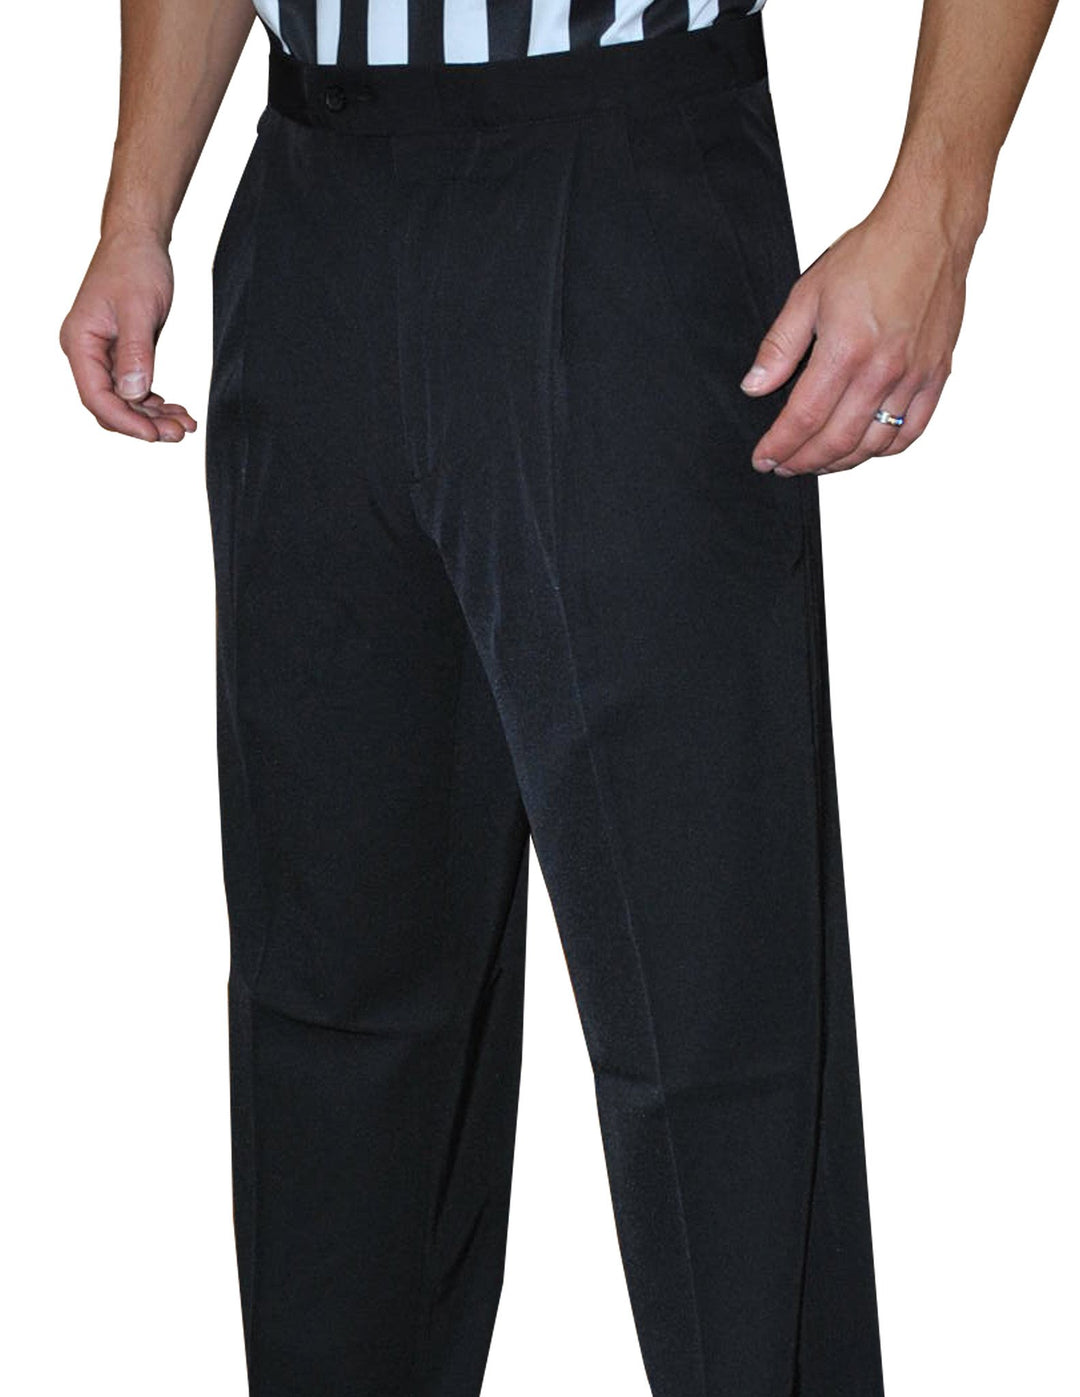 BKS291-"NEW TAPERED FIT PANTS" Smitty 4-Way Stretch Pleated Pants w/ Slash Pockets